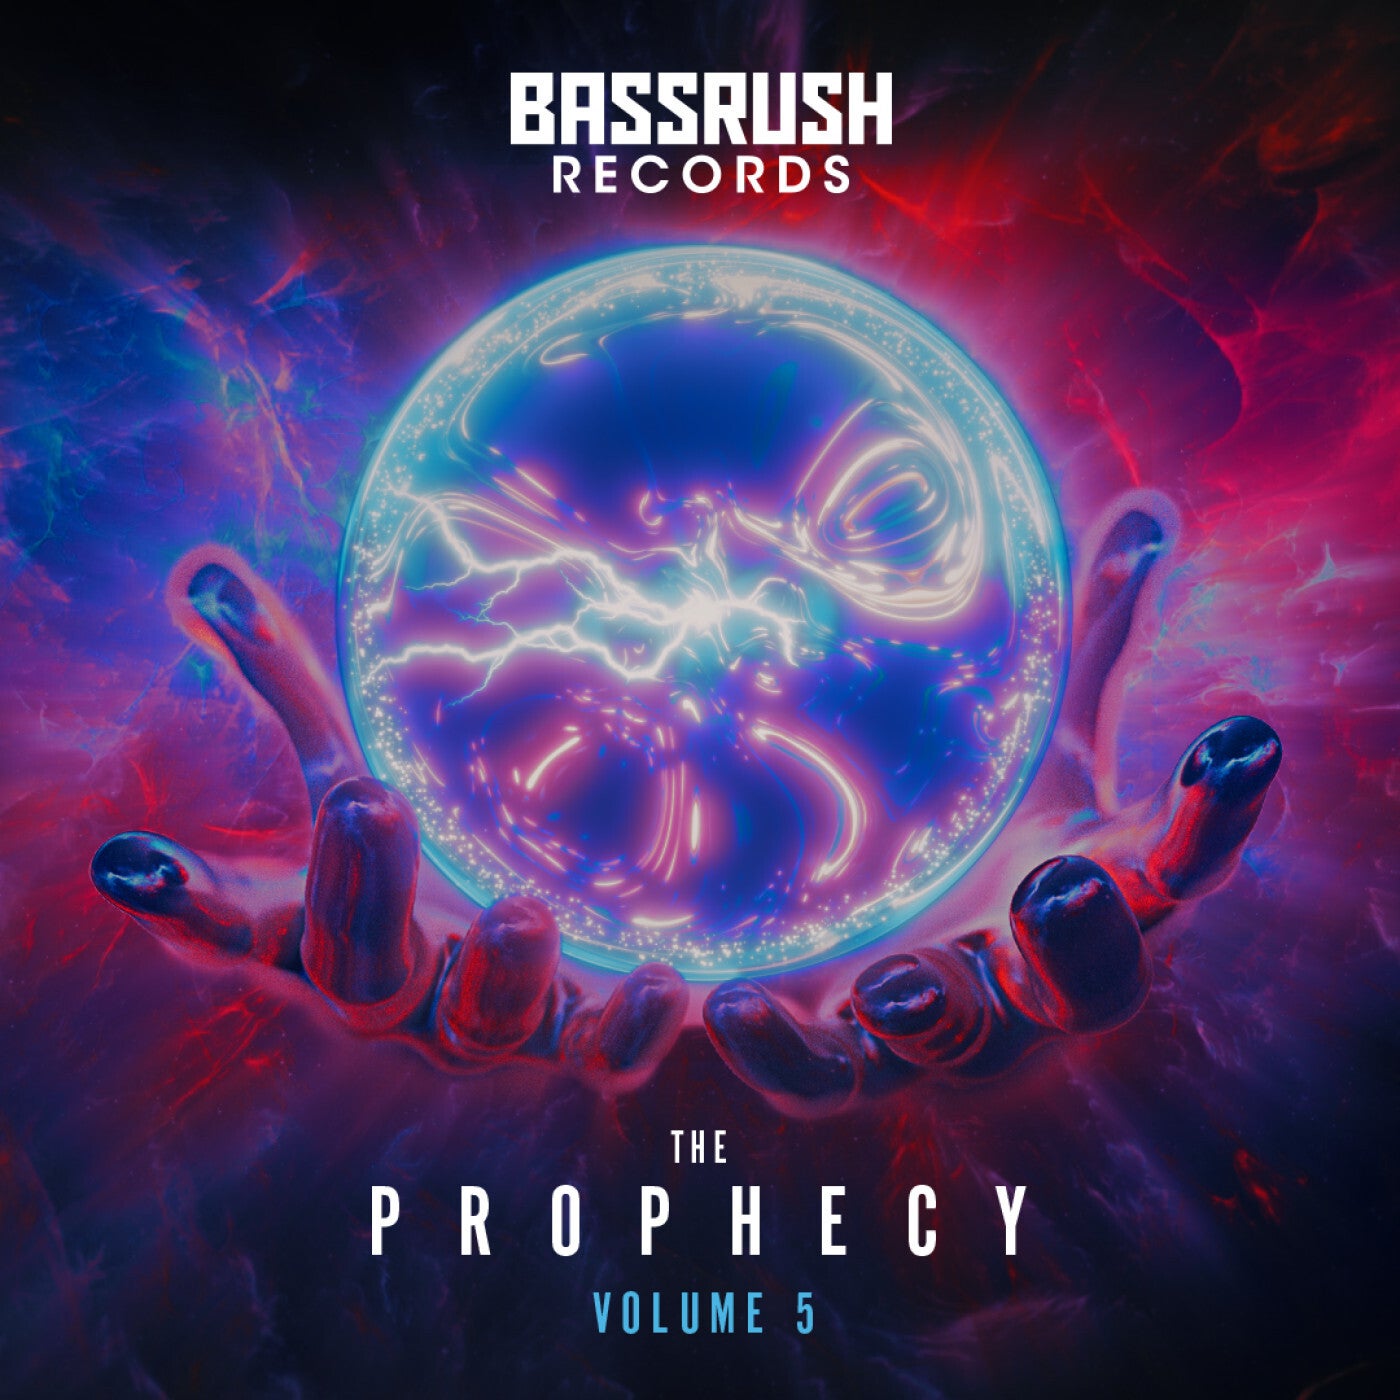 The Prophecy: Volume 5